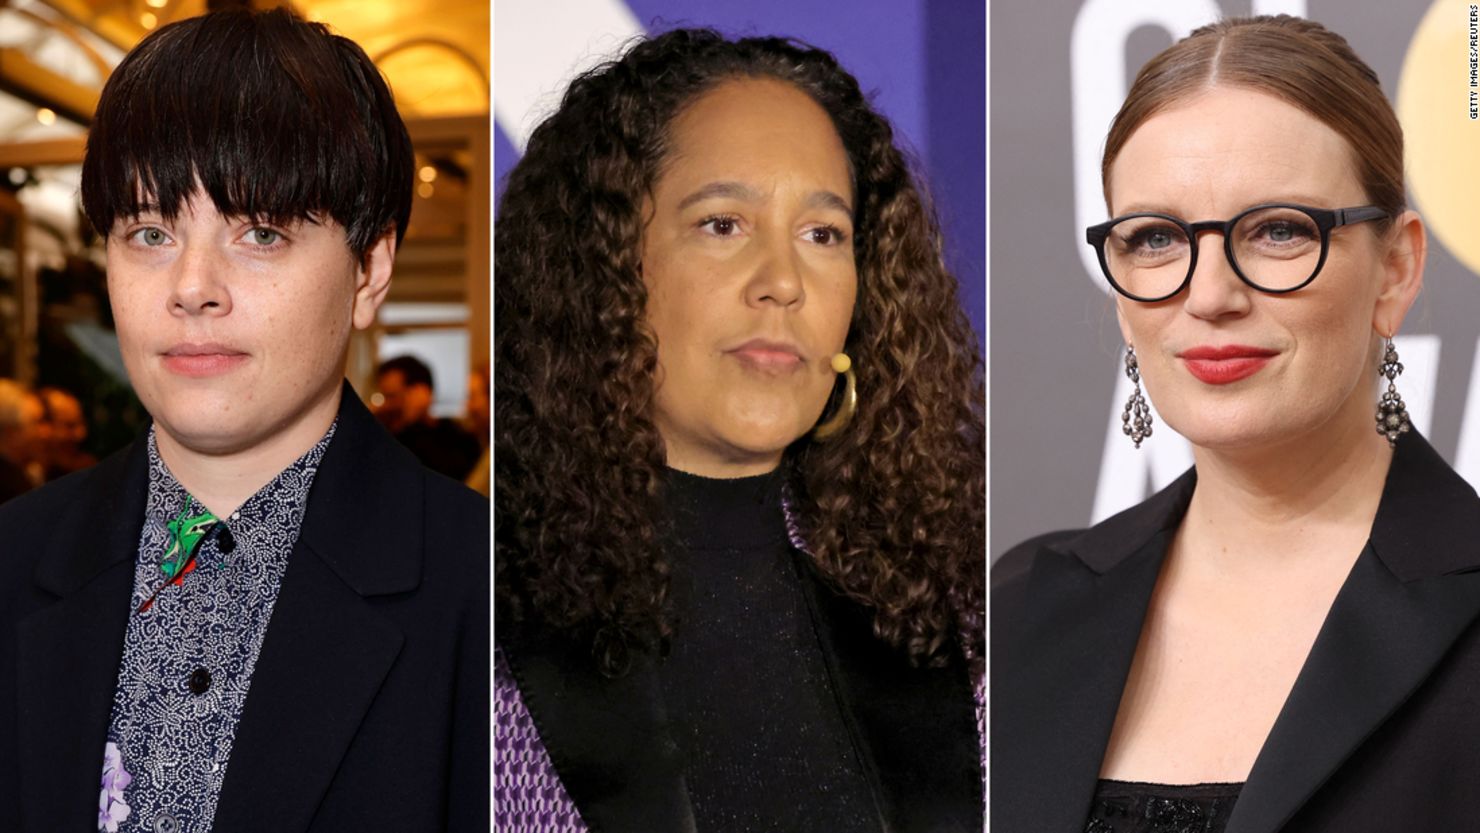 Directors Charlotte Wells, Gina Prince-Bythewood and Sarah Polley were among those left out of the best director Oscar category this year. 